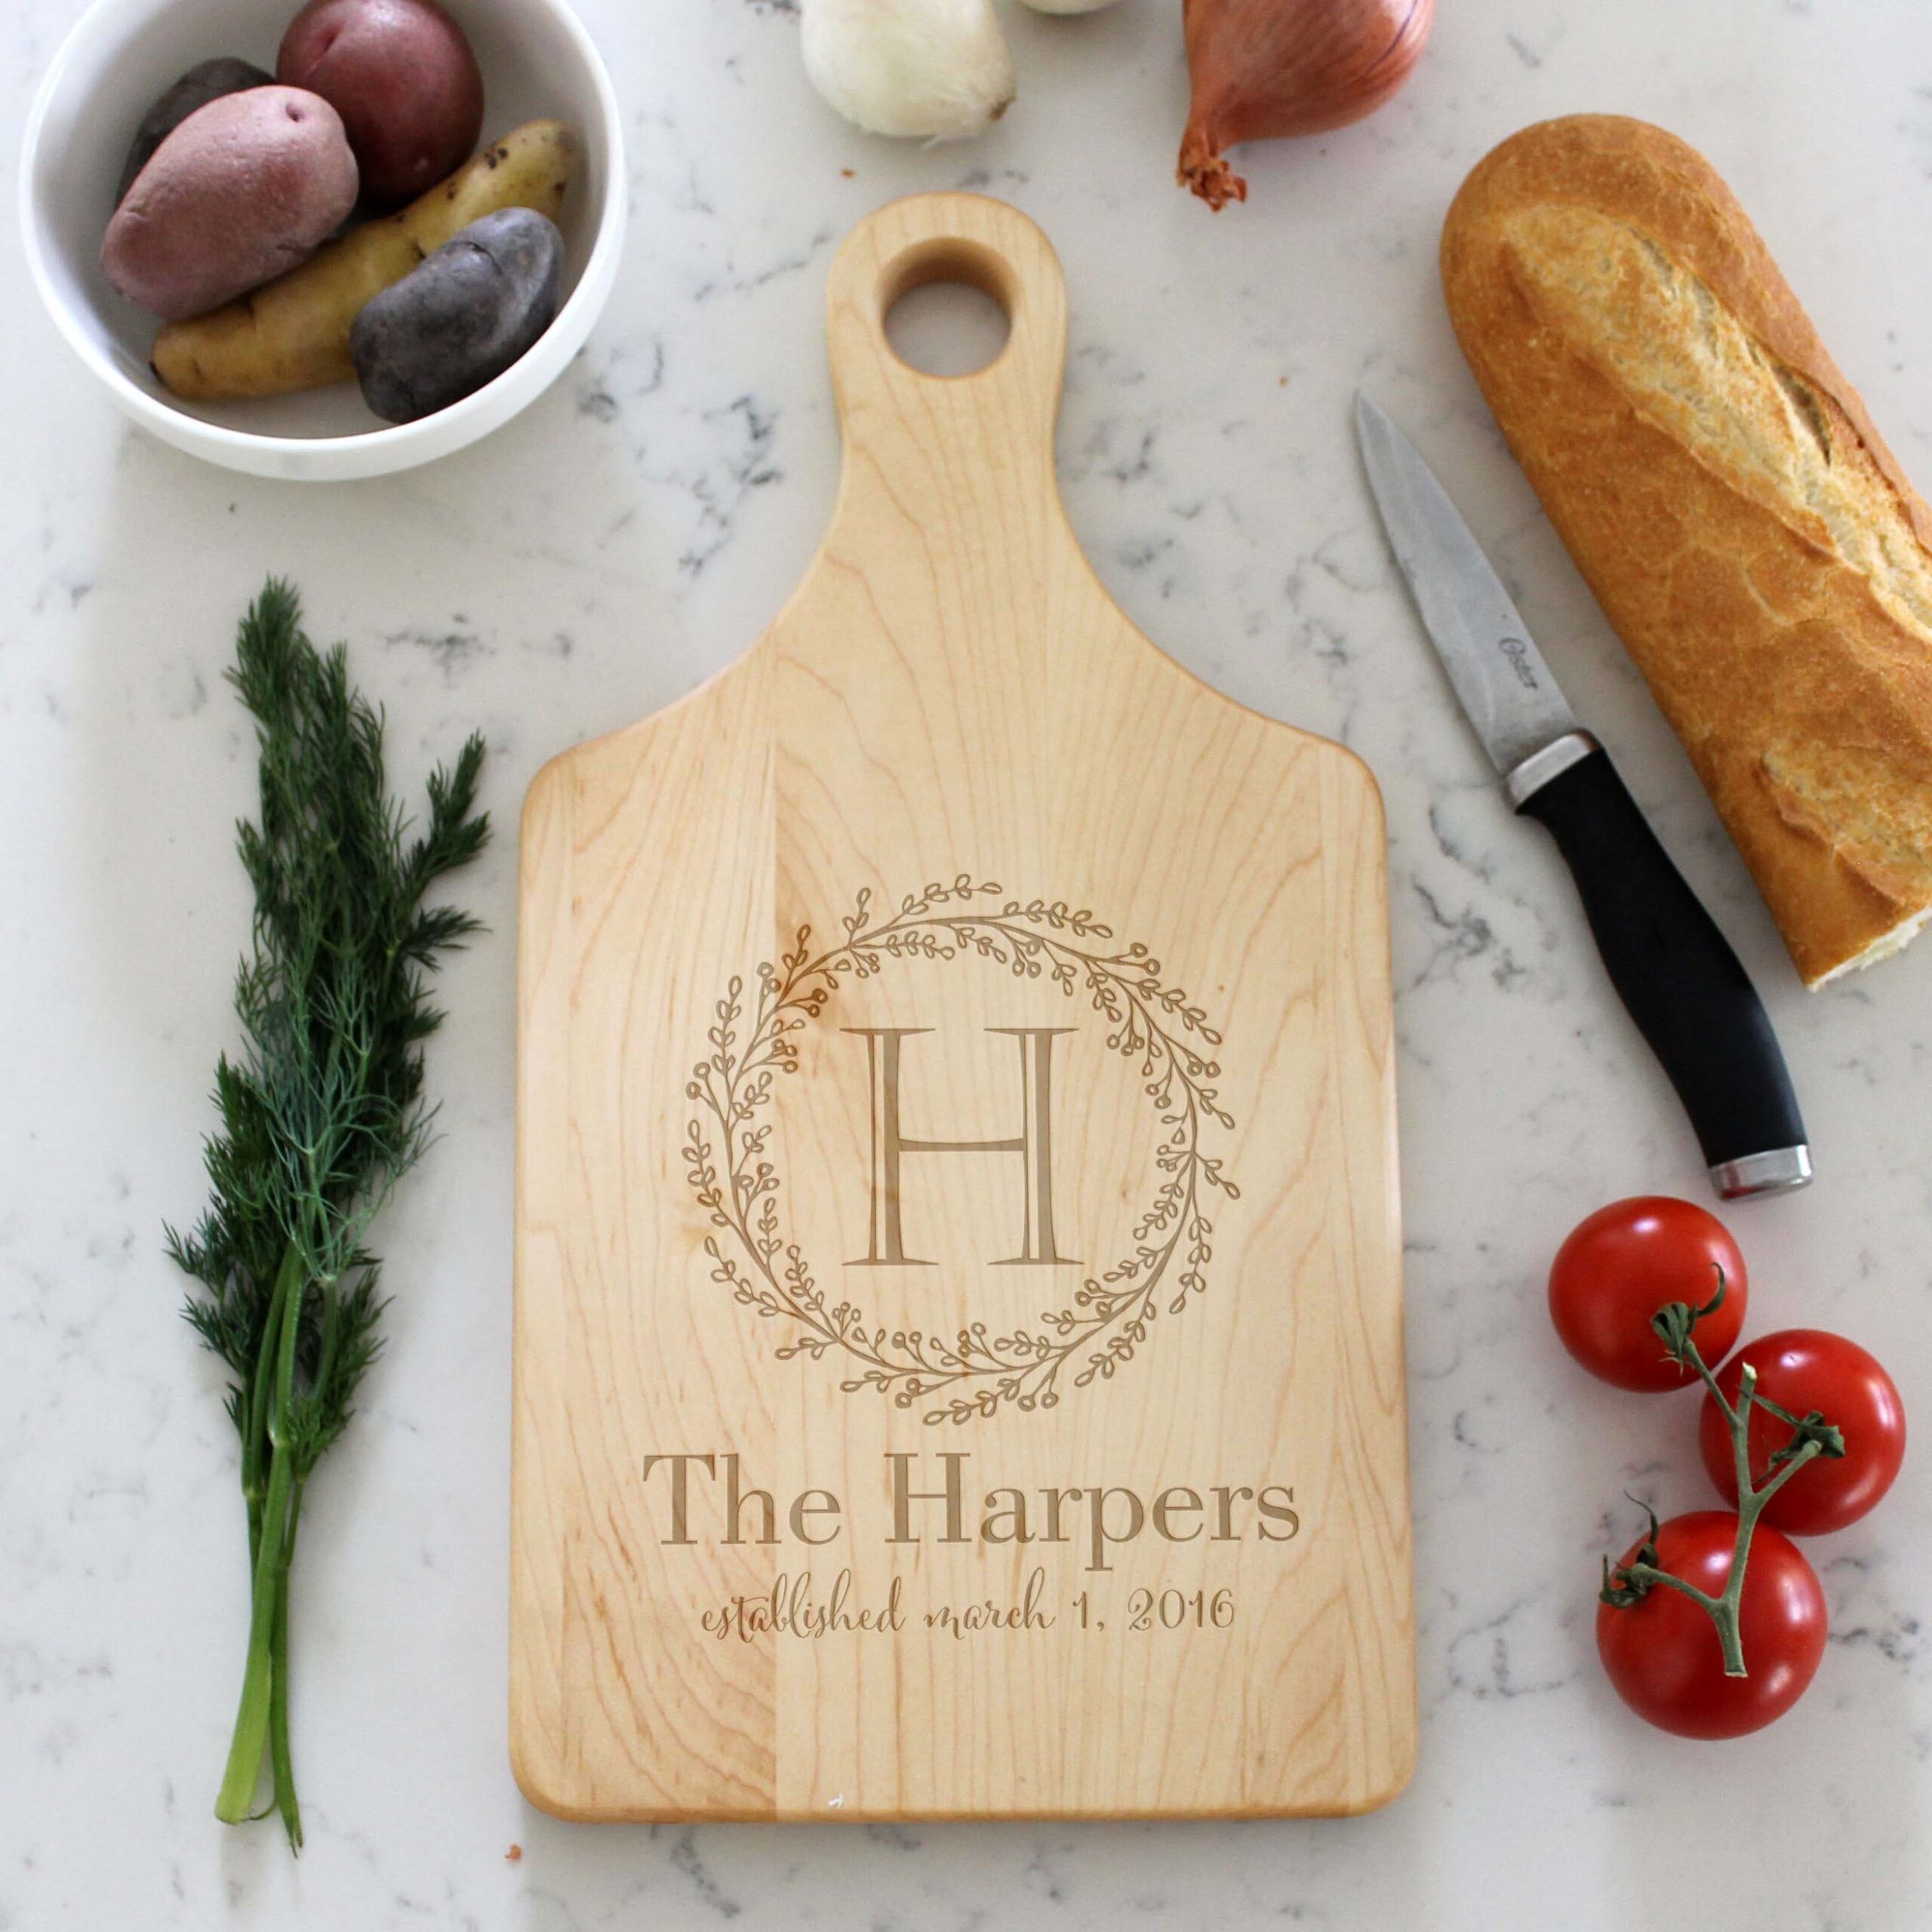 Why choose wooden chopping boards for your kitchen